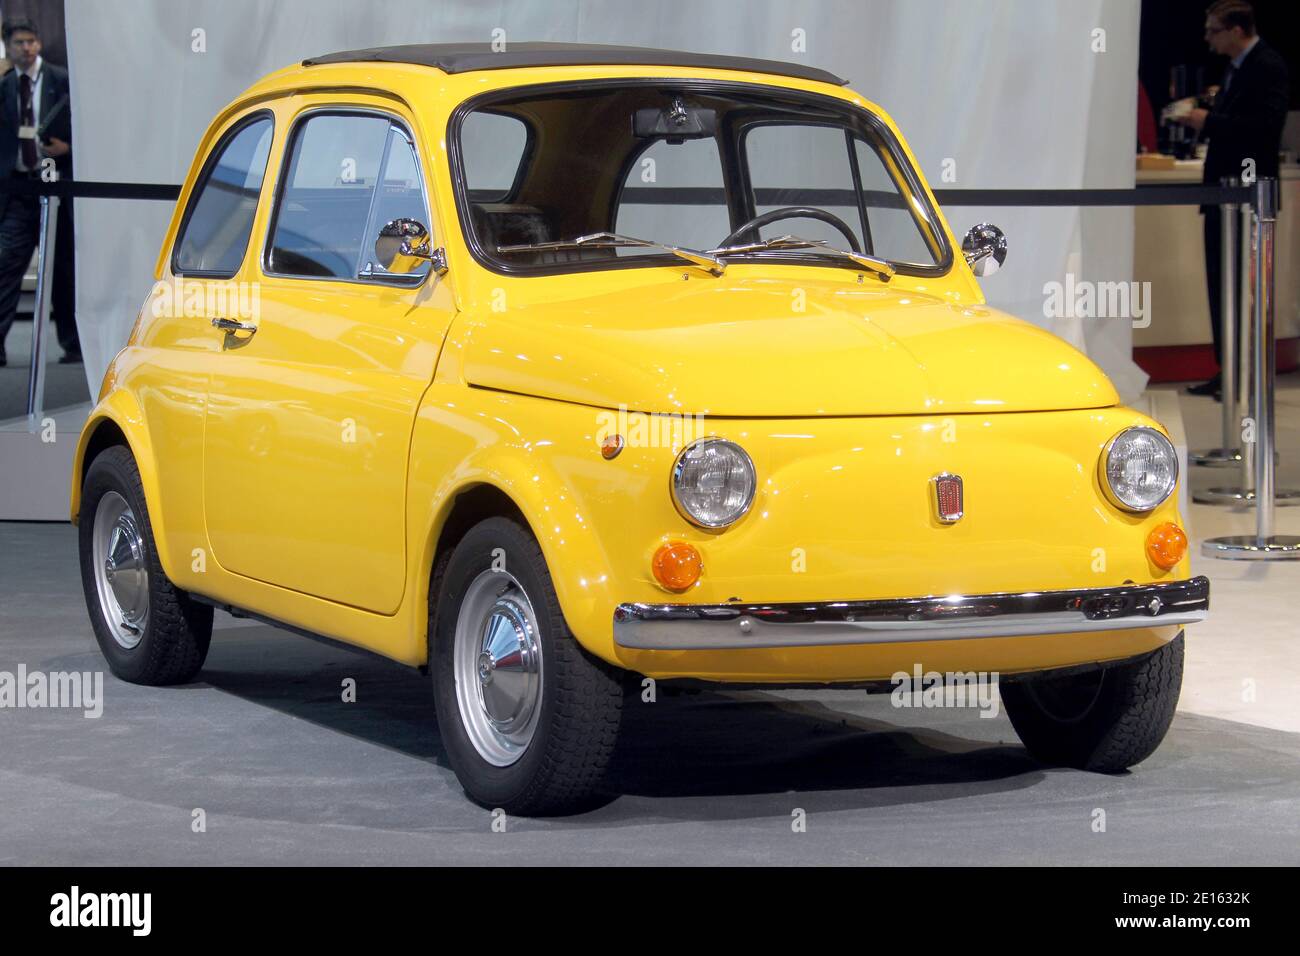 1970 Fiat 500 car is displayed during the media day of the New York International Auto Show at the Jacob K. Javits Convention Center in New York City, NY on April 20, 2011.Photo by Charles Guerin/ABACAPRESS.COM Stock Photo